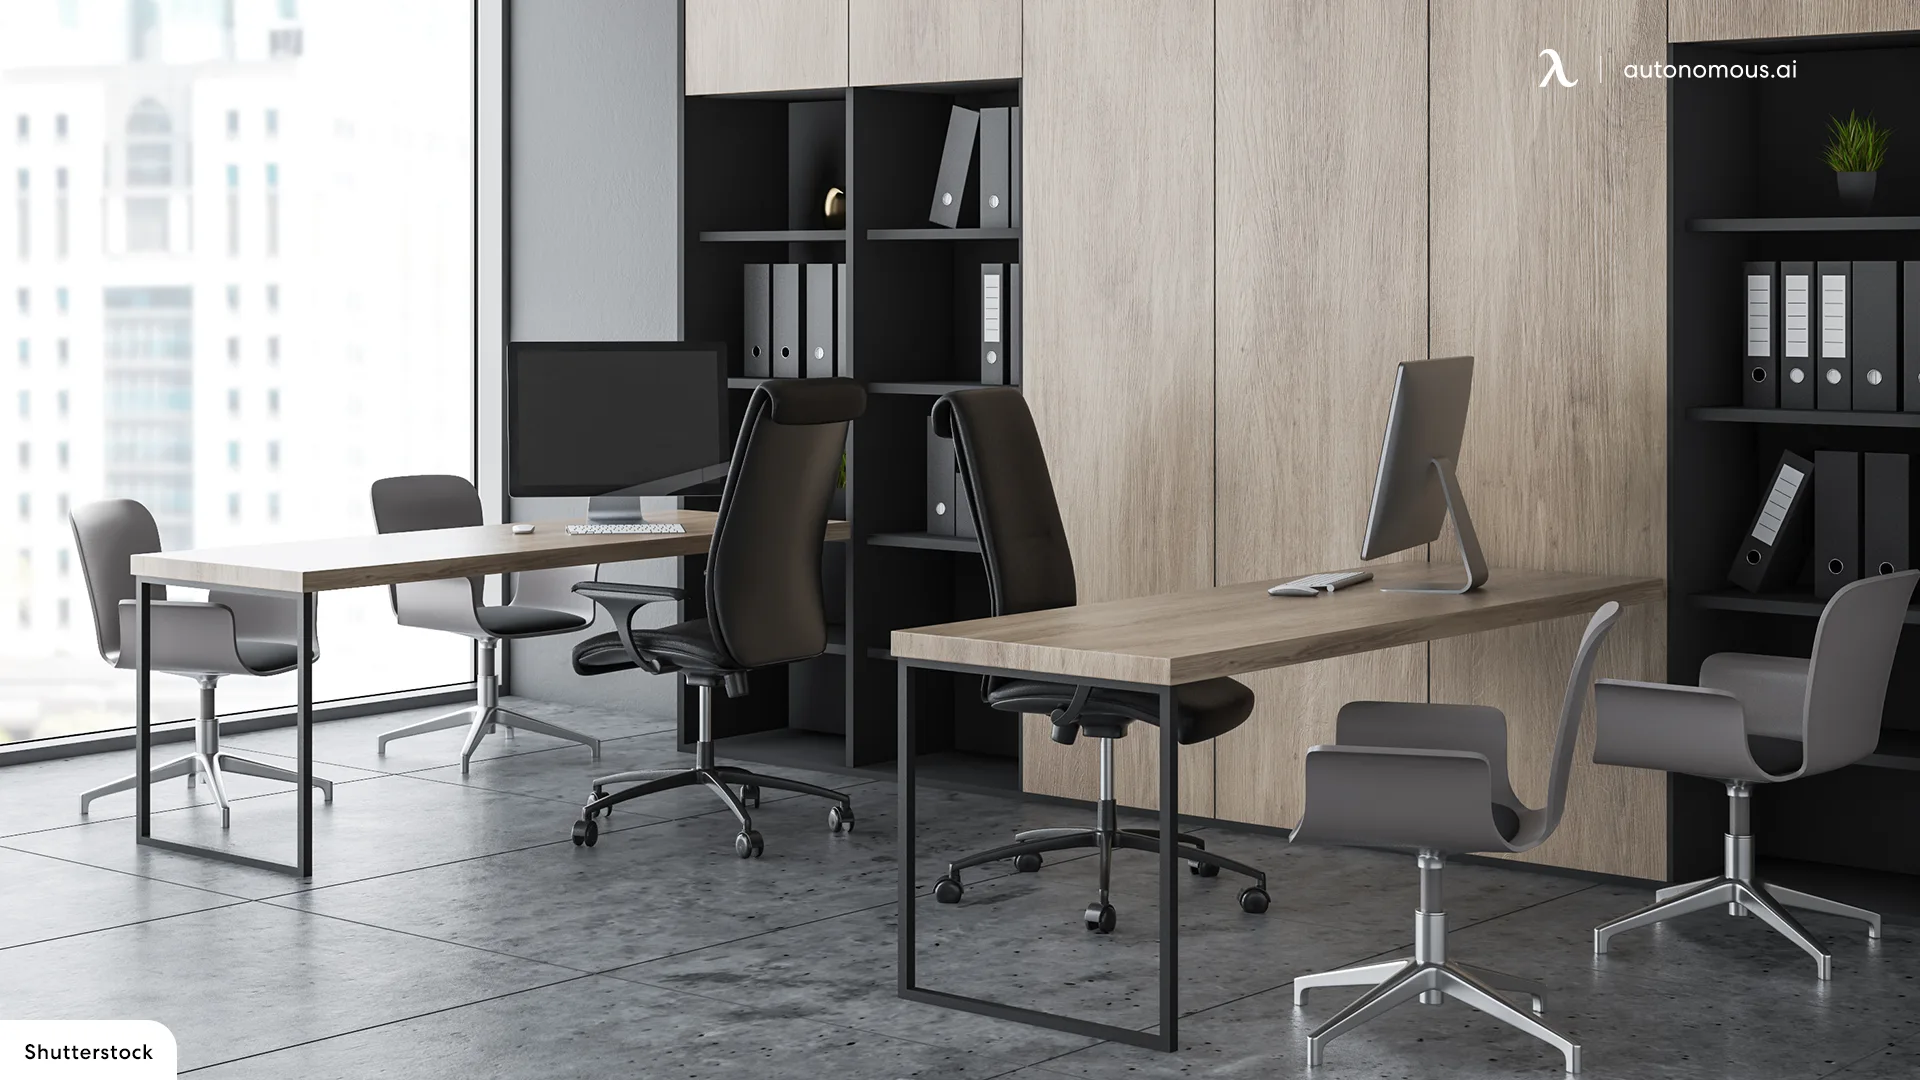 The 10 Best Chair Designs for an Office in 2022 (Tested by Experts)